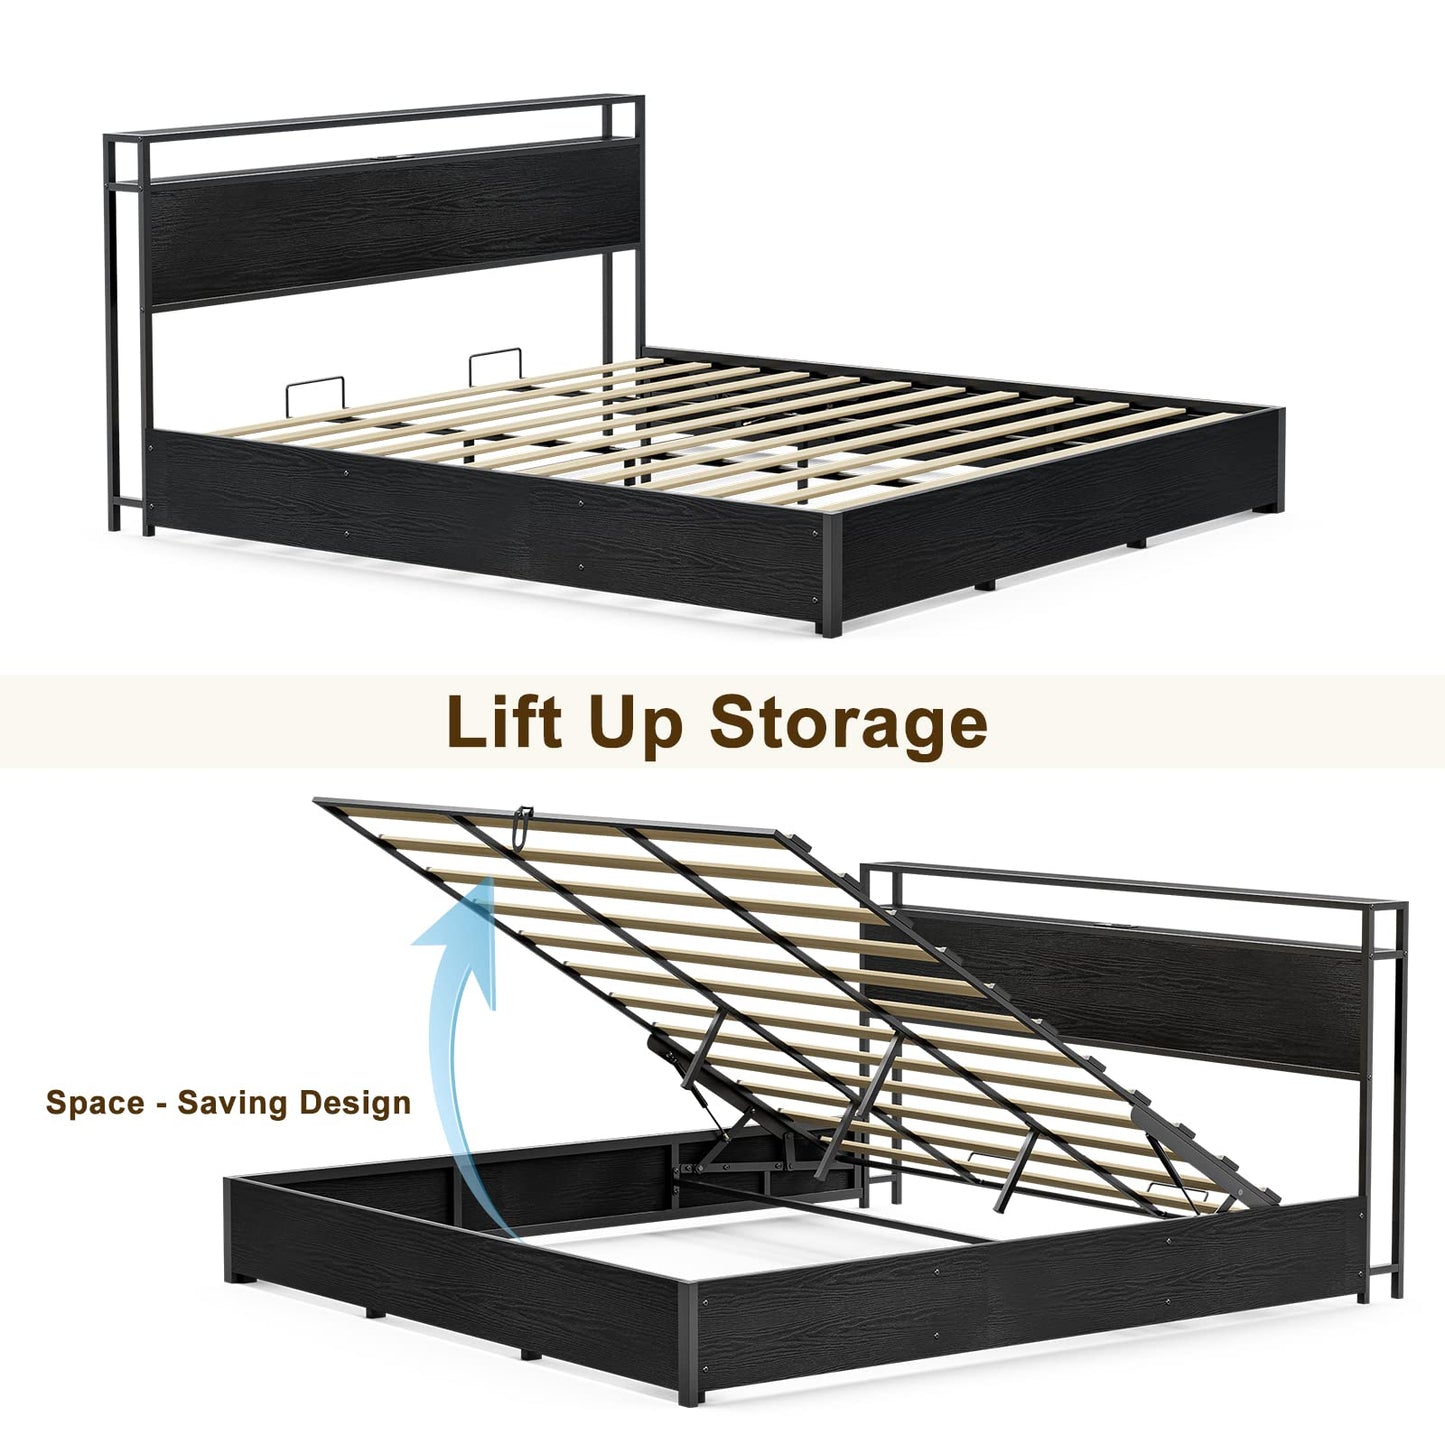 IKIFLY King Size Lift Up Storage Bed with Charging Station - Metal King Platform Bed Frame with Storage Shelf Headboard, Solid Wood Slats, No Box Spring Needed, Easy Assembly - Black